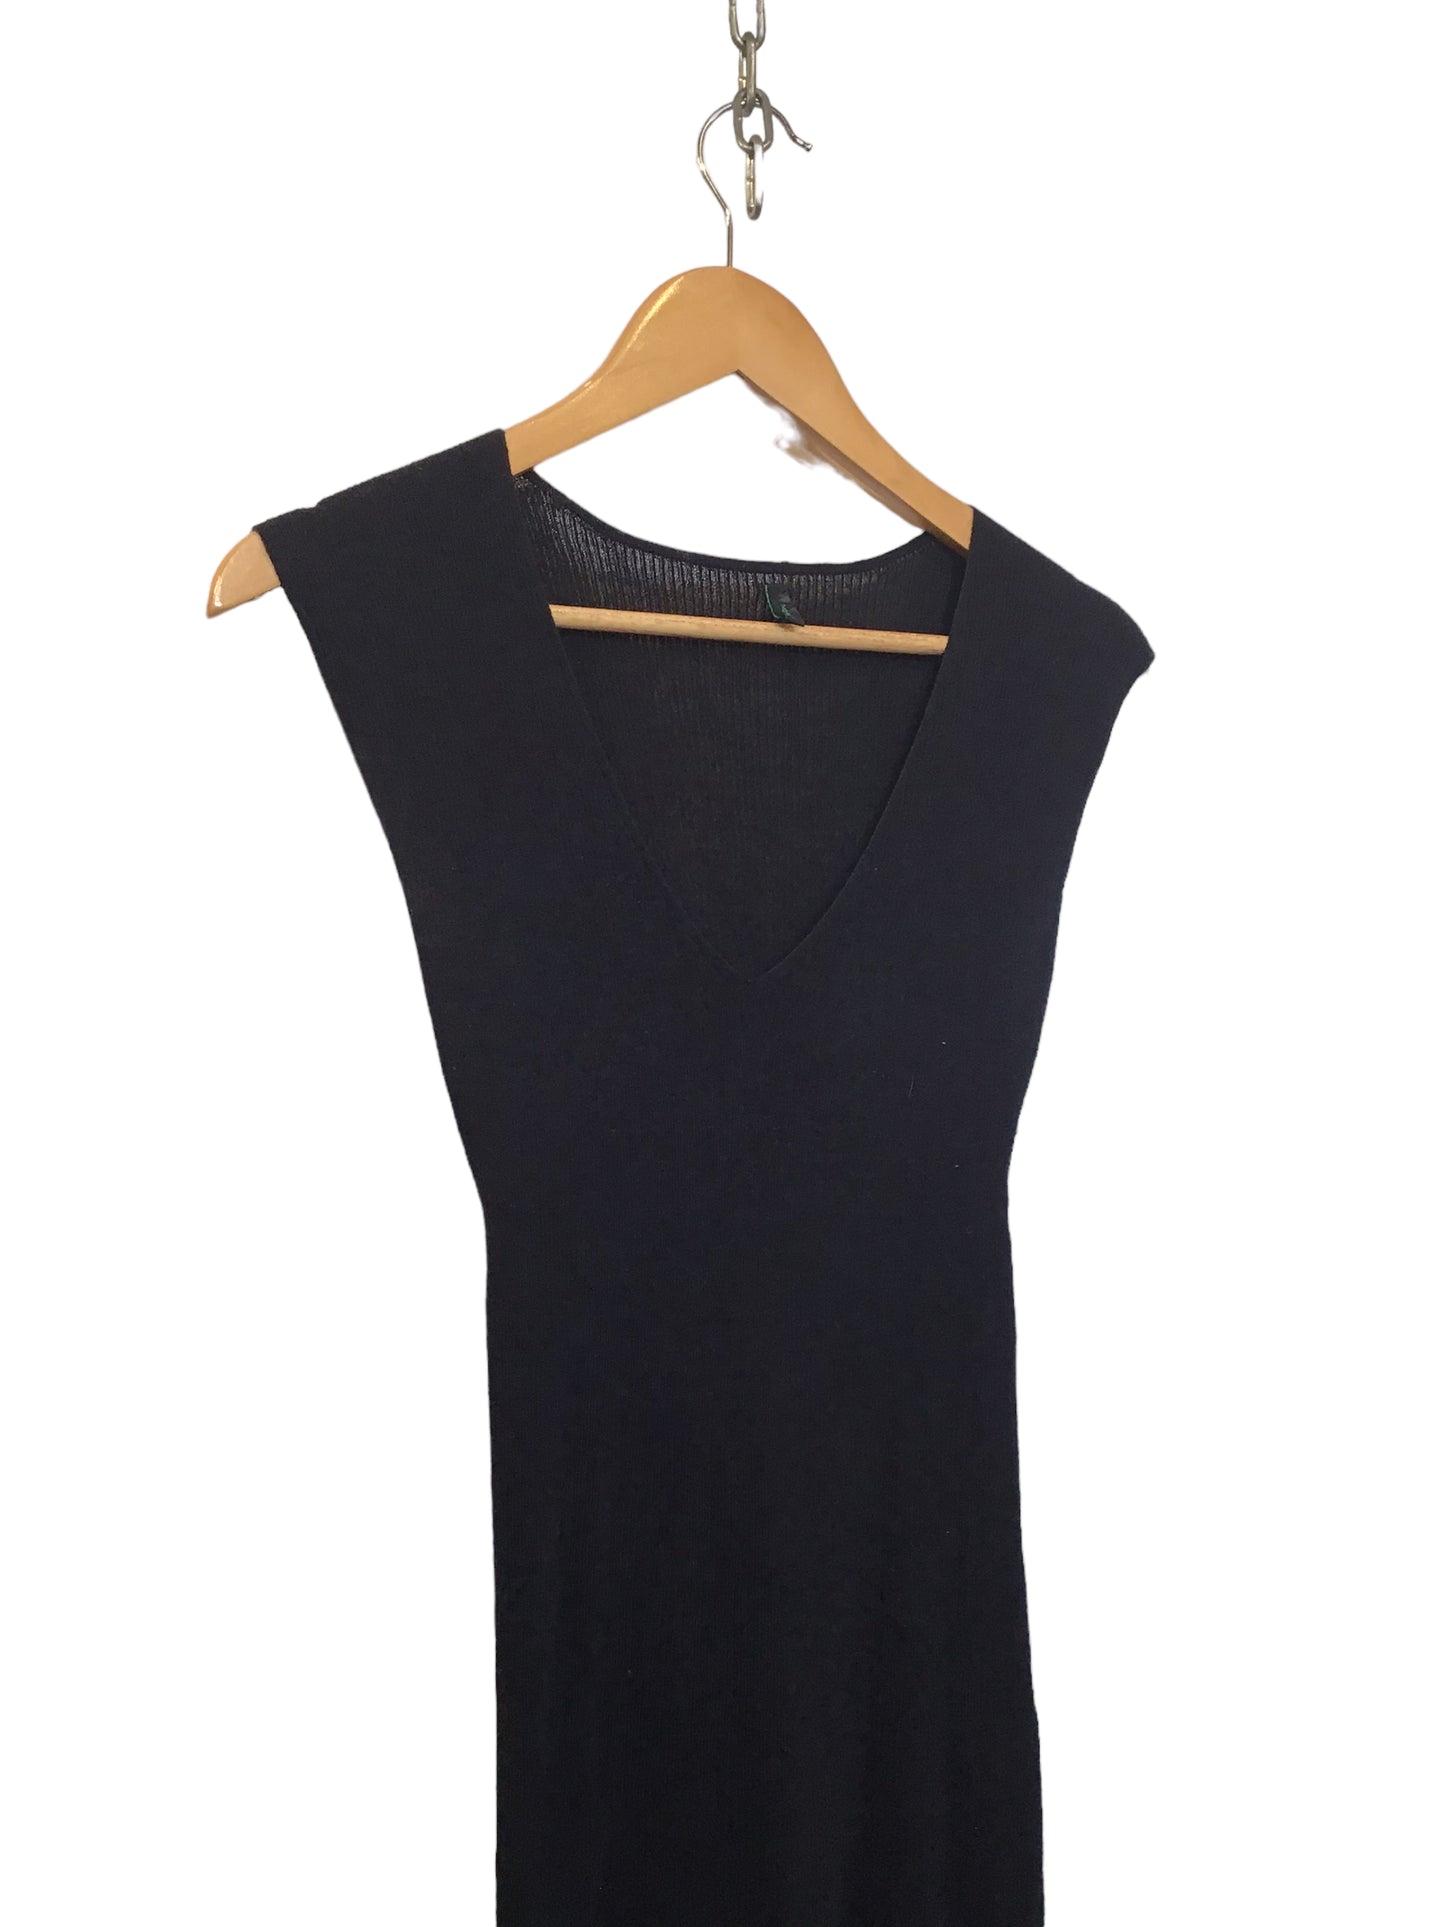 Black Knitted Dress (Size M)